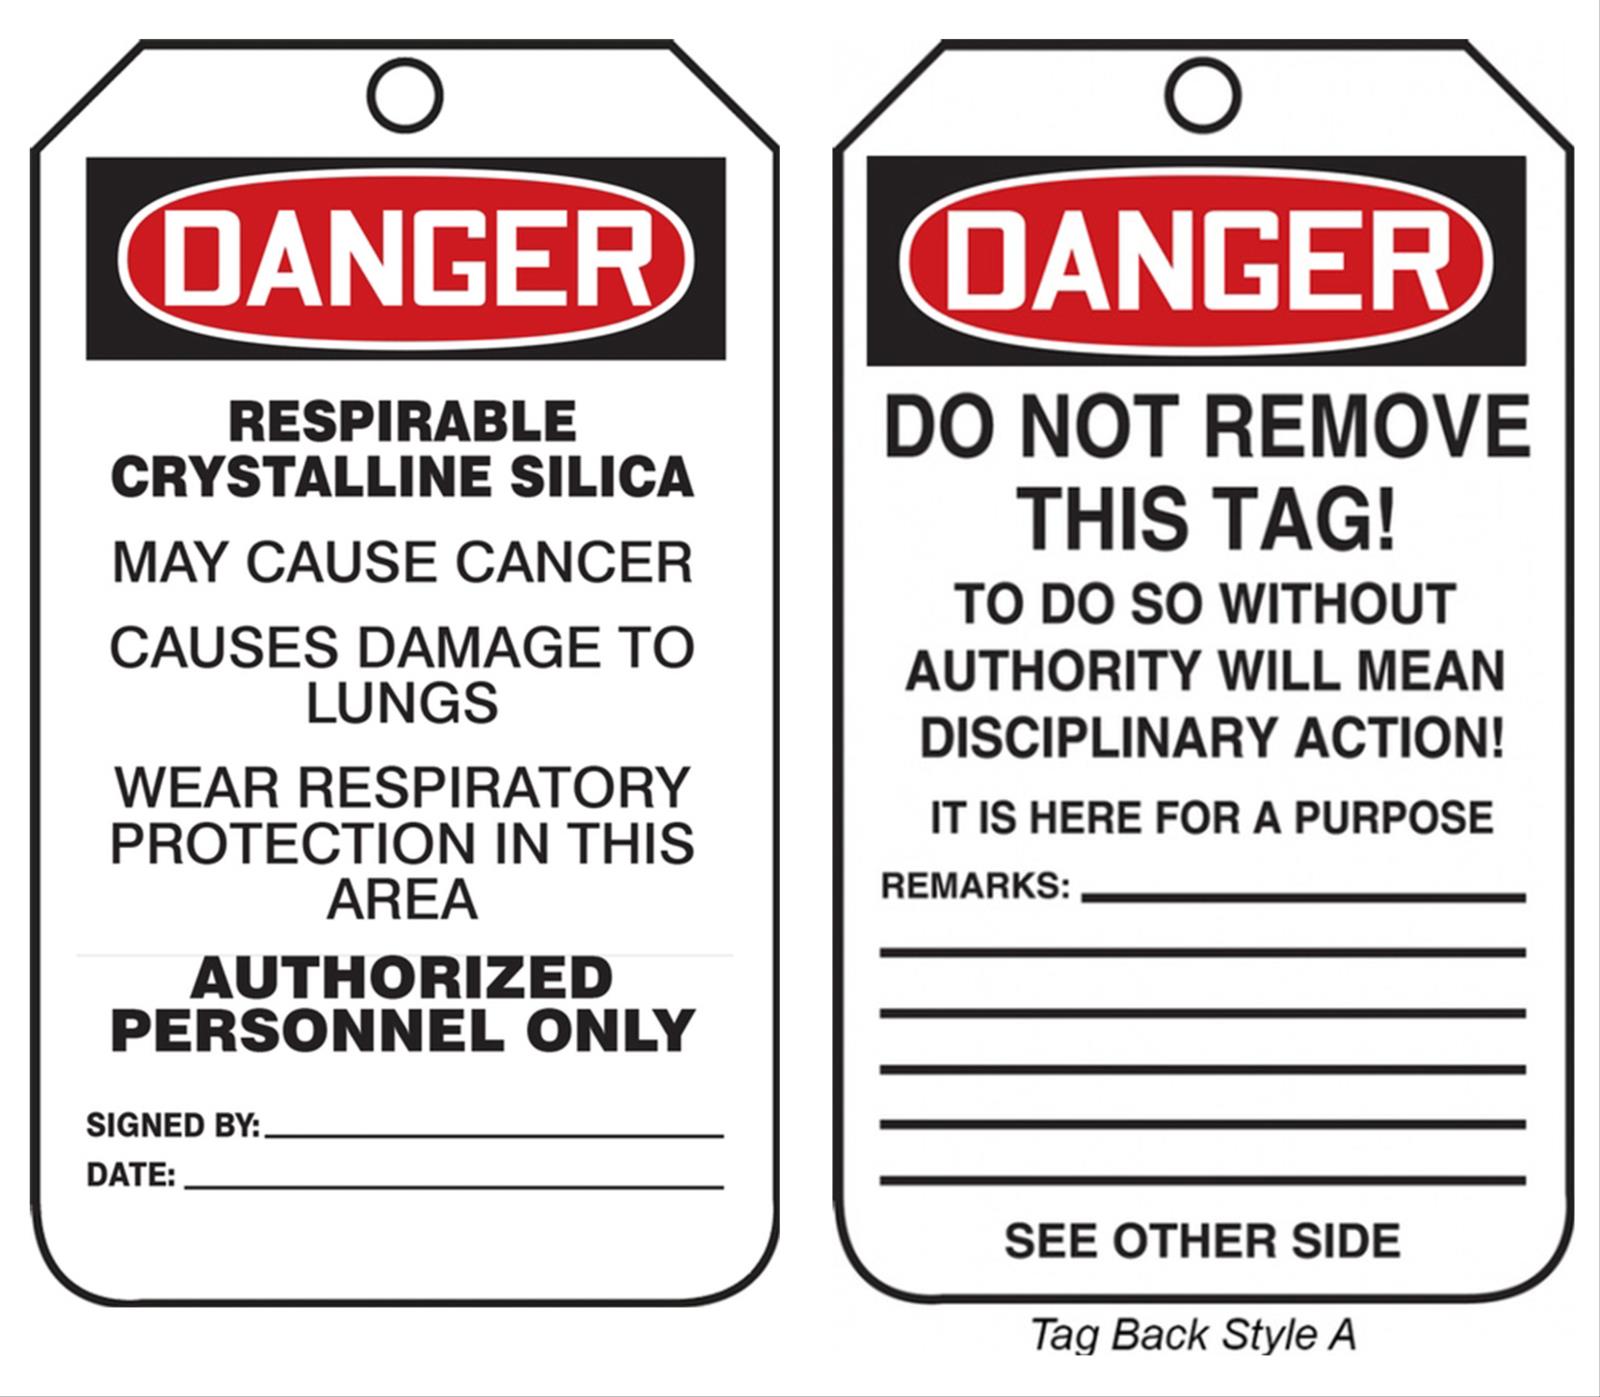 Safety Products Inc - OSHA Danger Safety Tags, Respirable ...